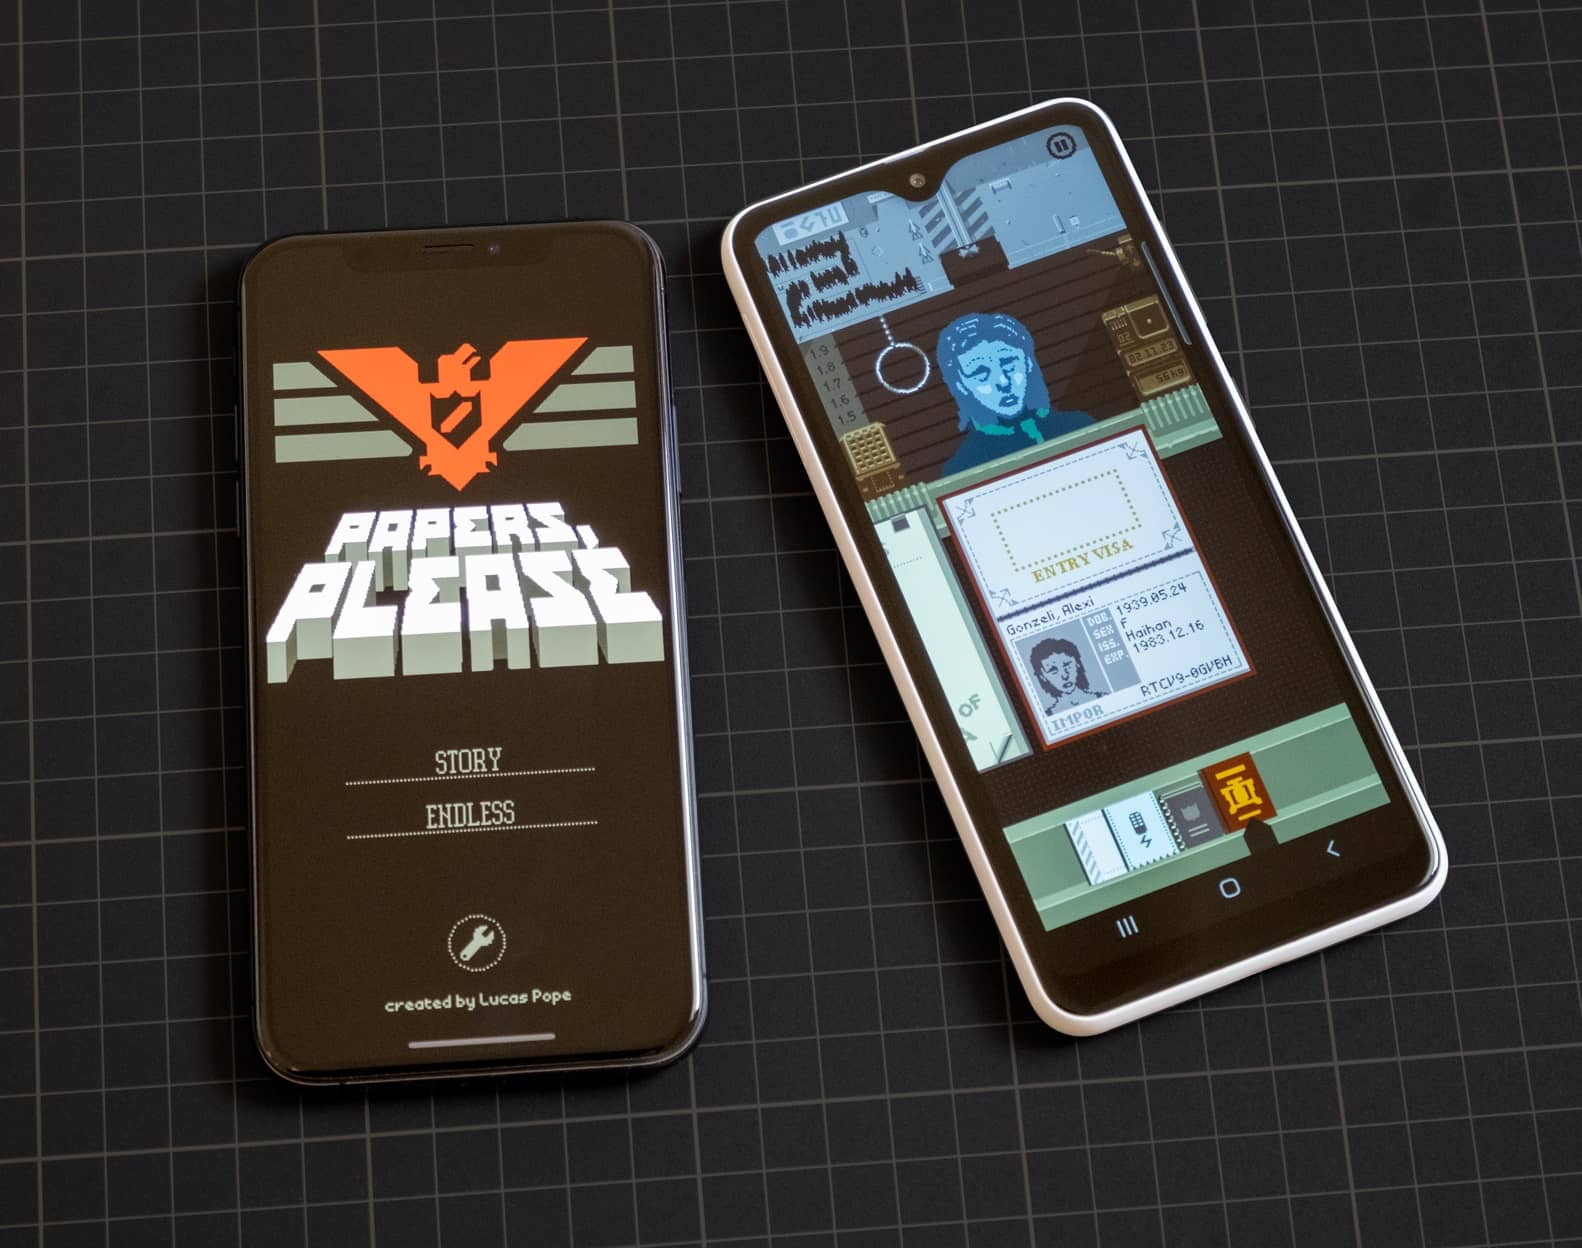 Papers, Please – na mobily